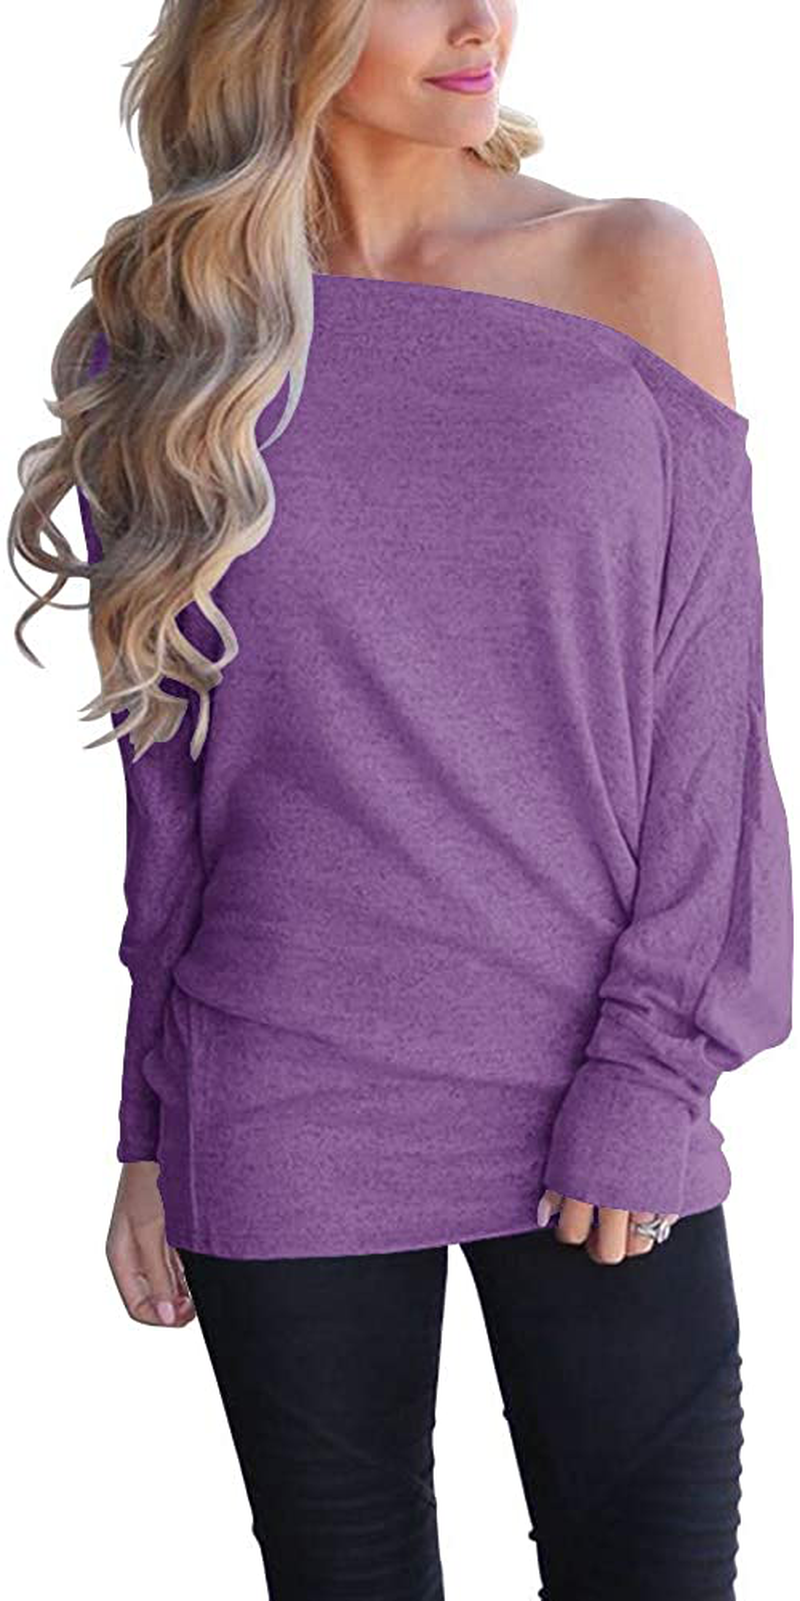 Lacozy Women's Off Shoulder Long Sleeve Oversized Pullover Sweater Knit Jumper Loose Tunic Tops